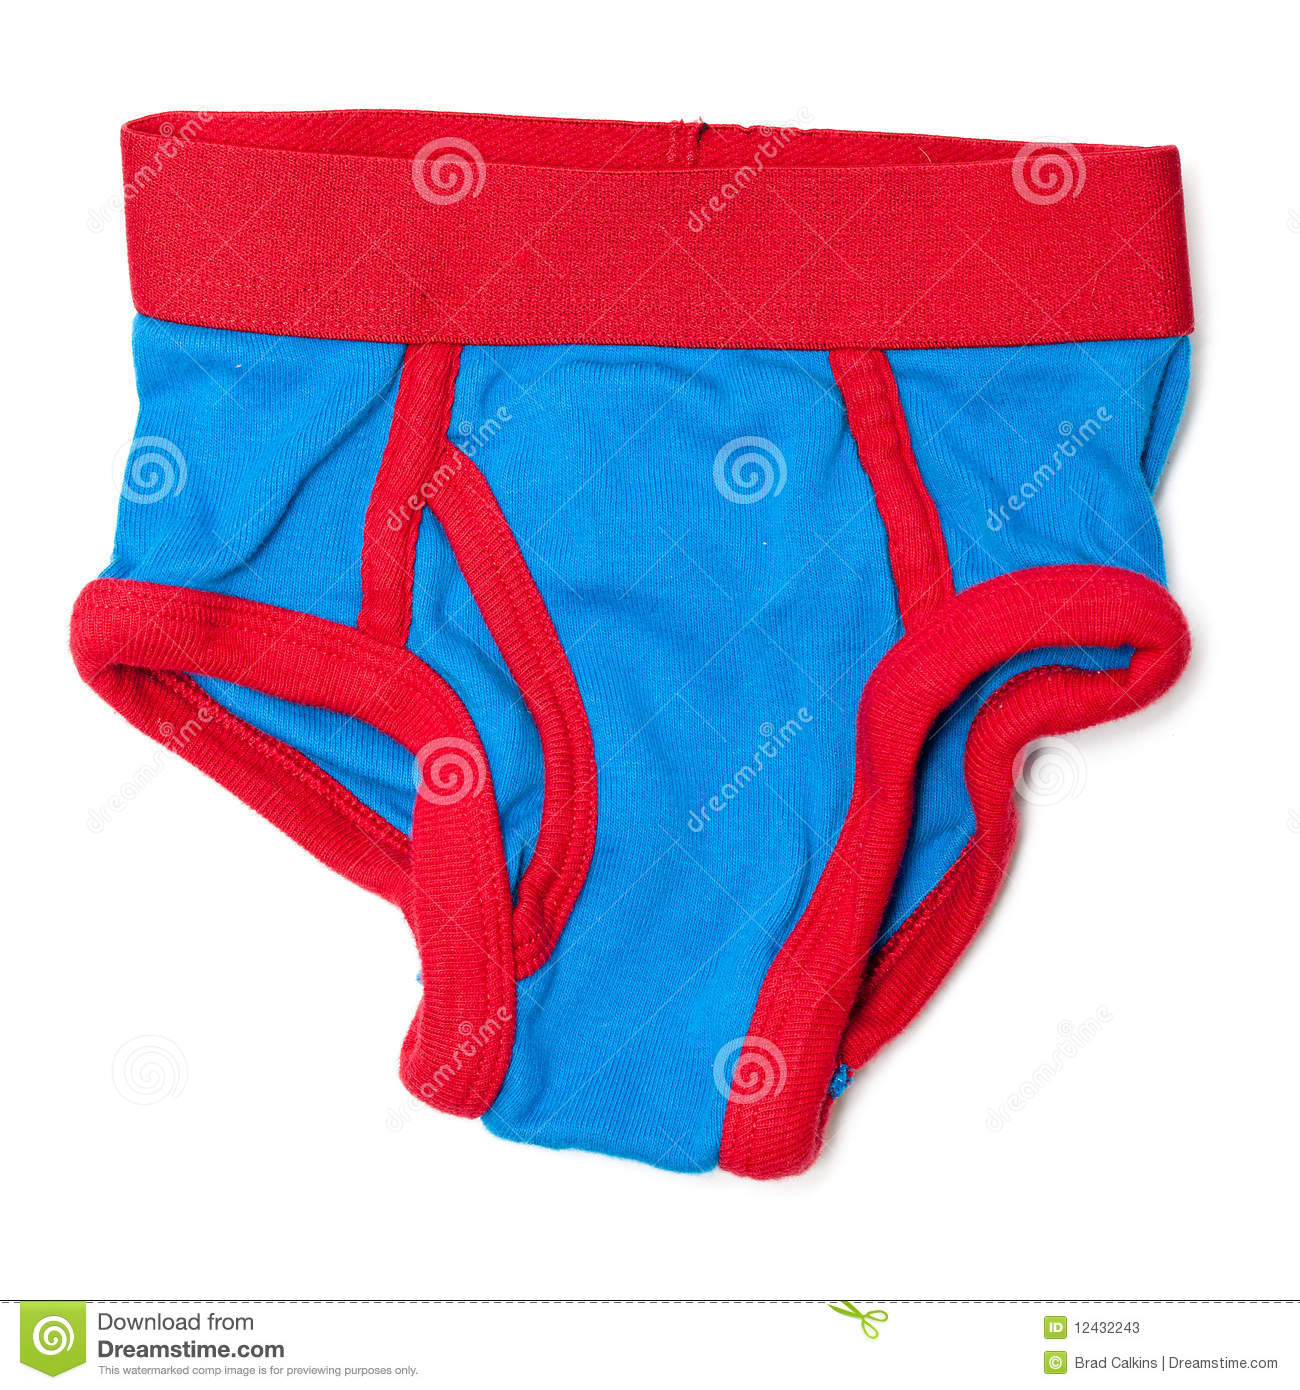 Of Bright Red And Blue Boys Underwear On Isolated White Background